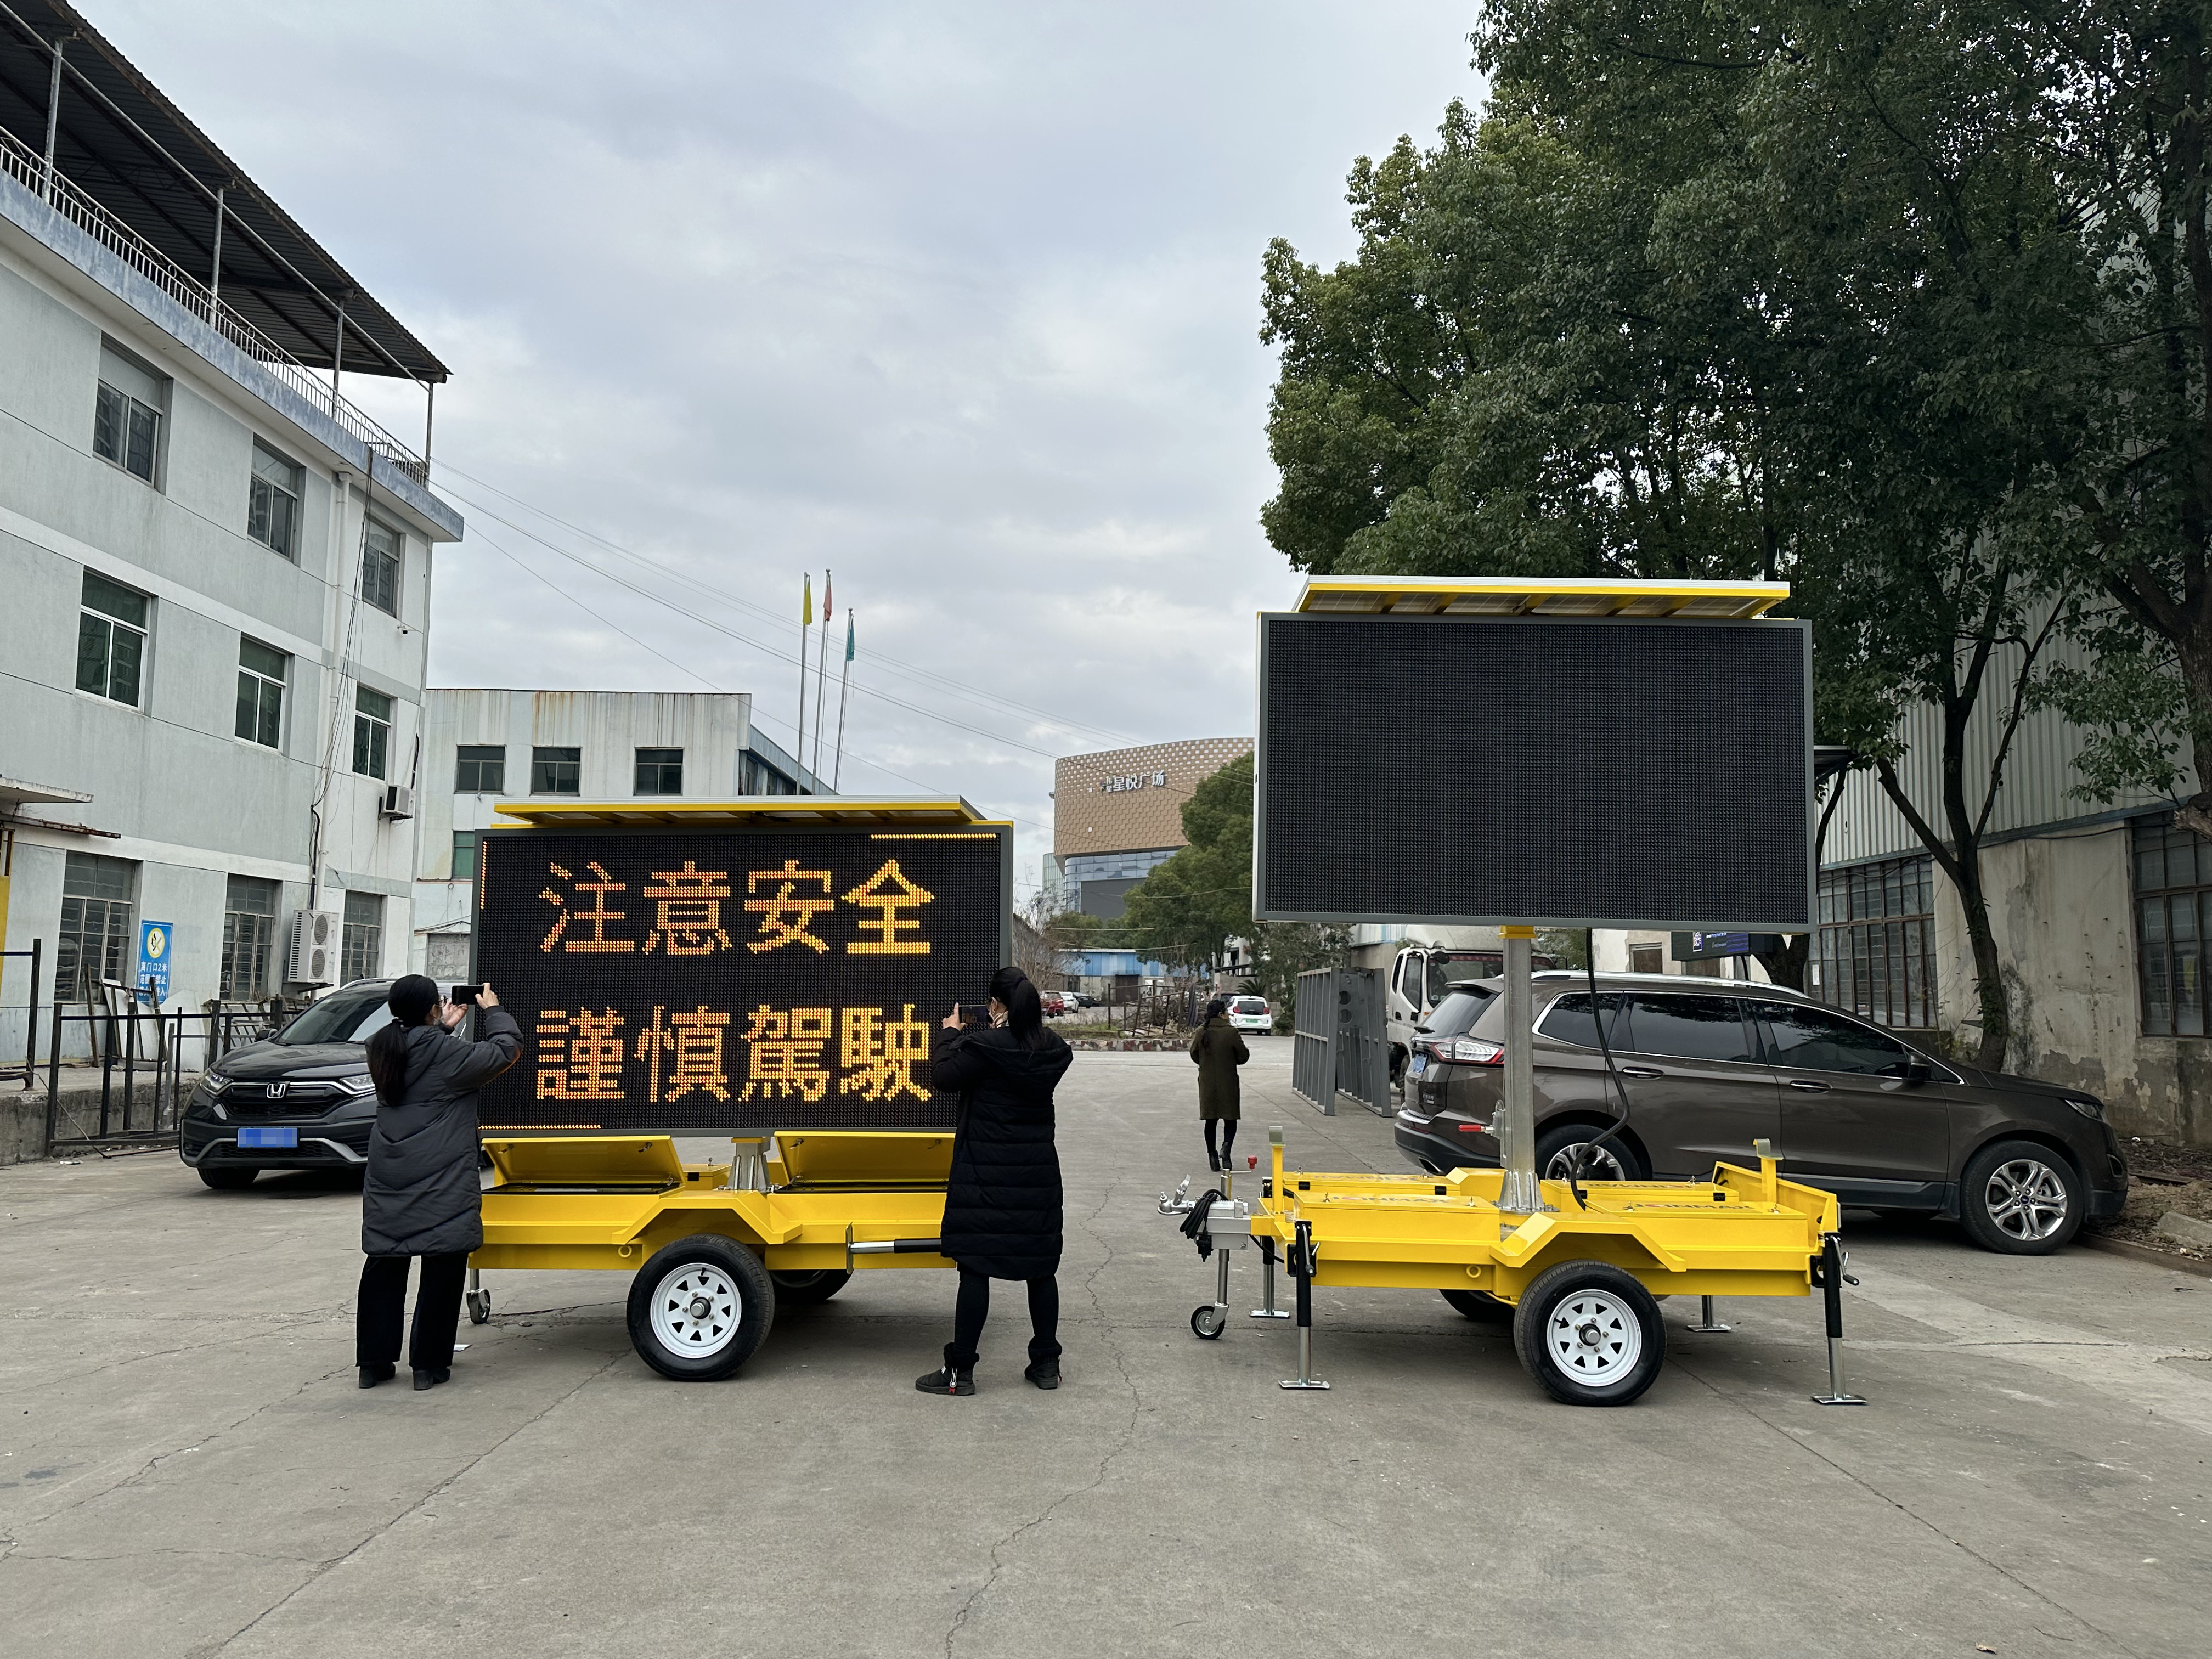 VMS LED Trailer – A new type of mobile electronic sign